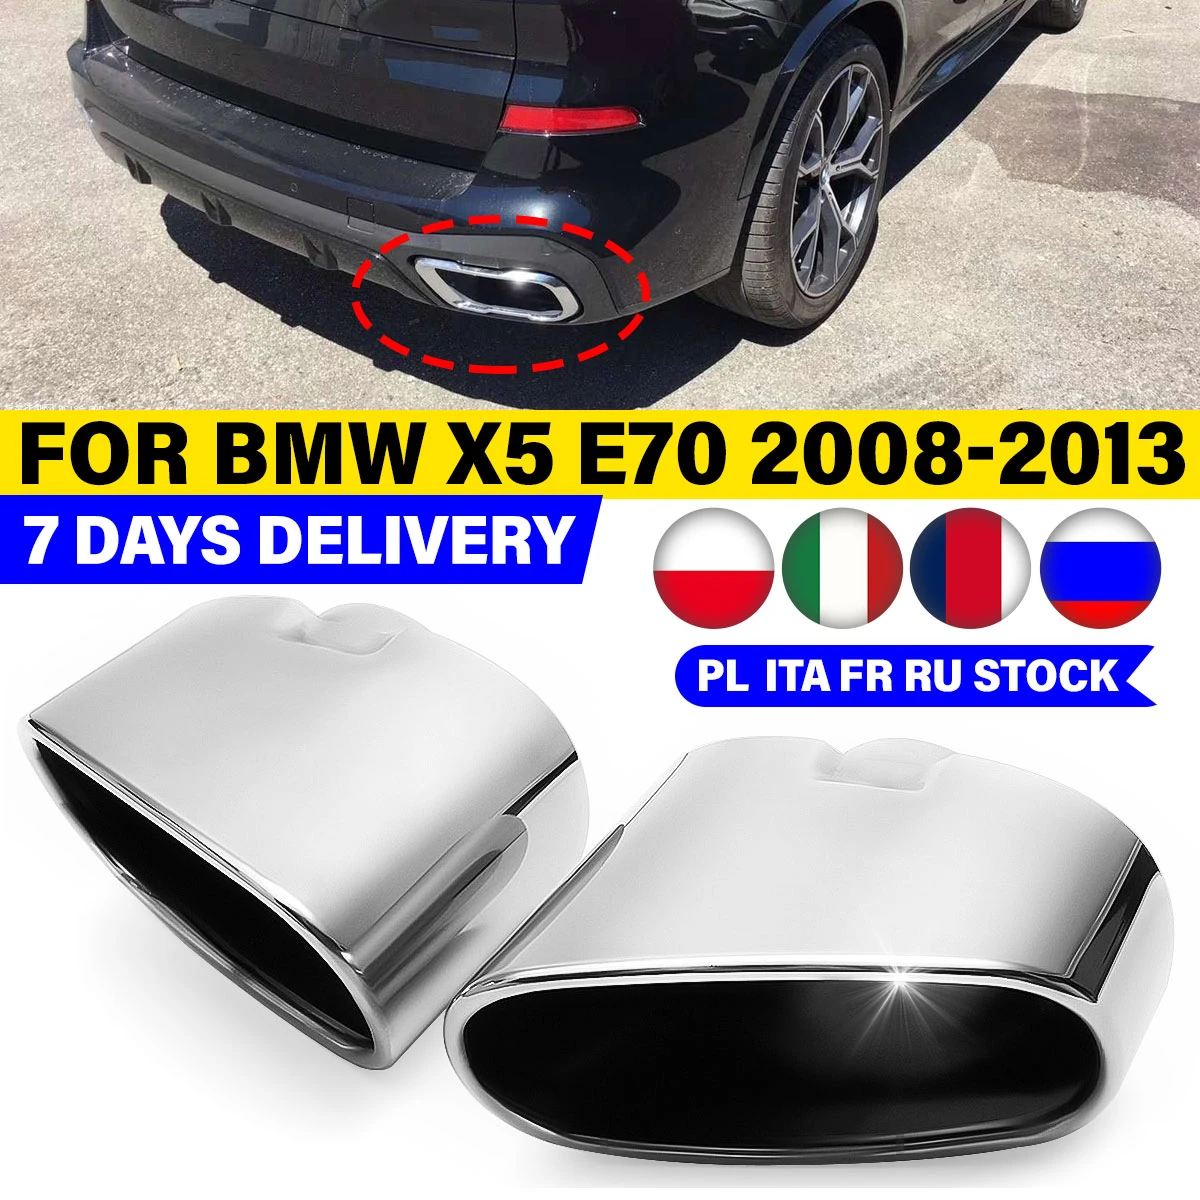 Pair Chrome Exhaust Dual Tail Pipe Muffler Tip Stainless Steel For BMW X5 E70 2008 2009 2010 2011 2012 2013 auto accessories